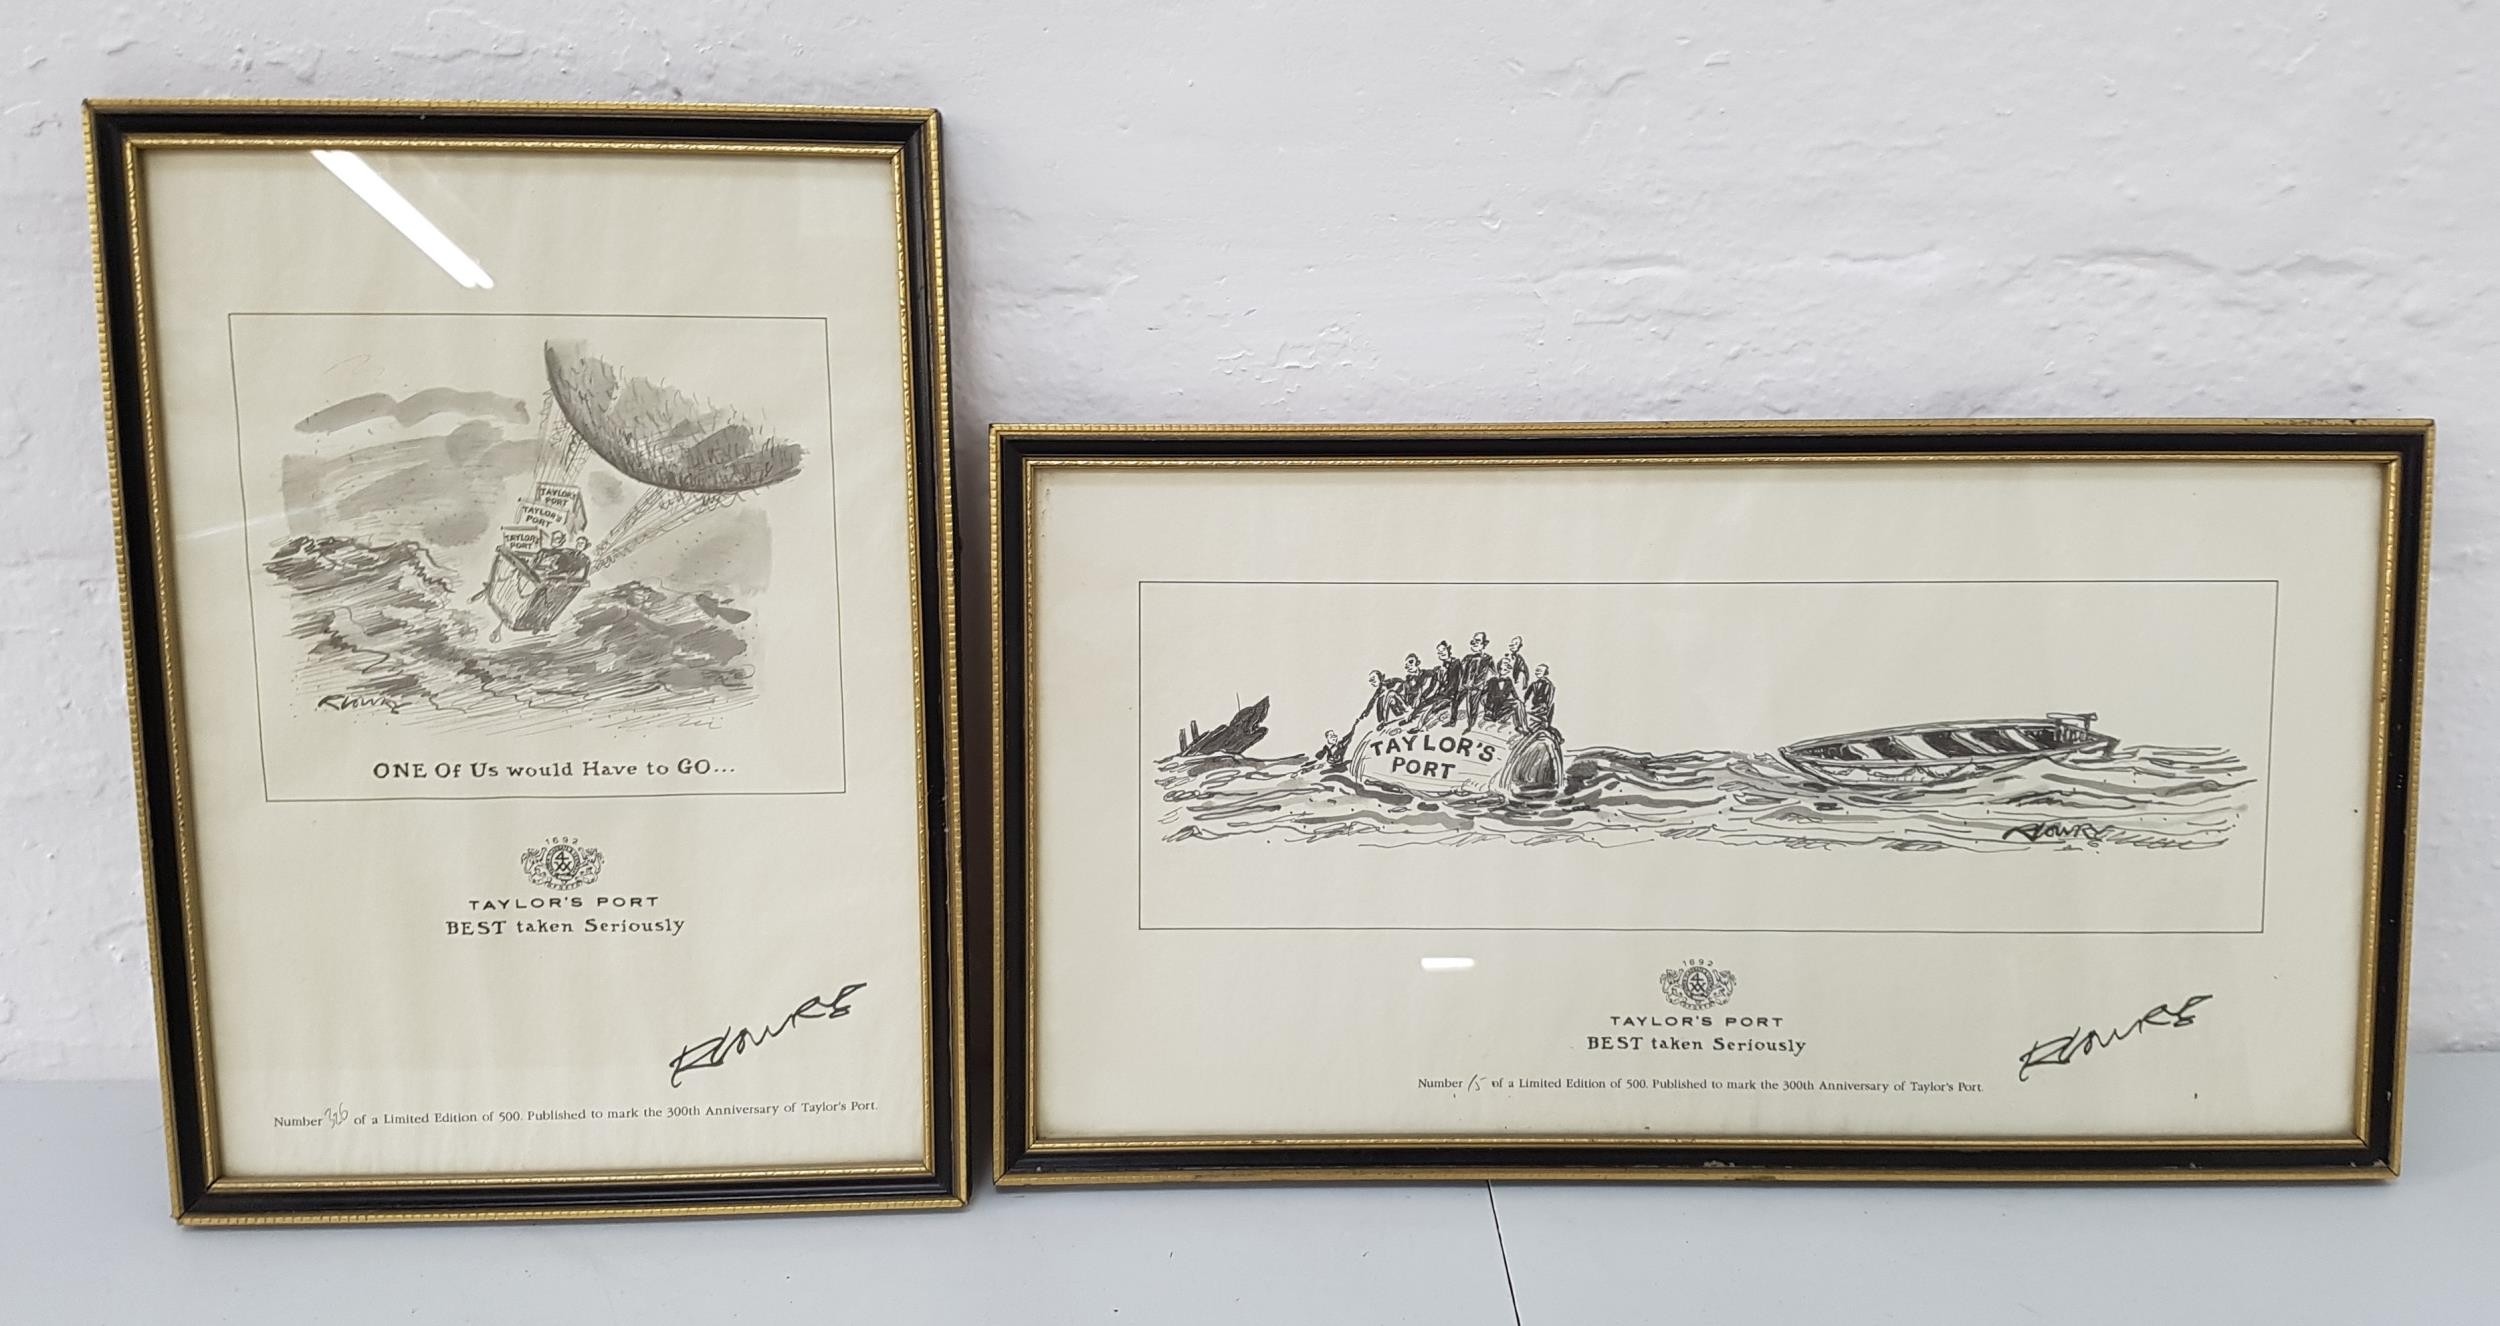 R. LOWRY two limited edition Taylor's Port prints, marking the 300th anniversary, numbered 15/500